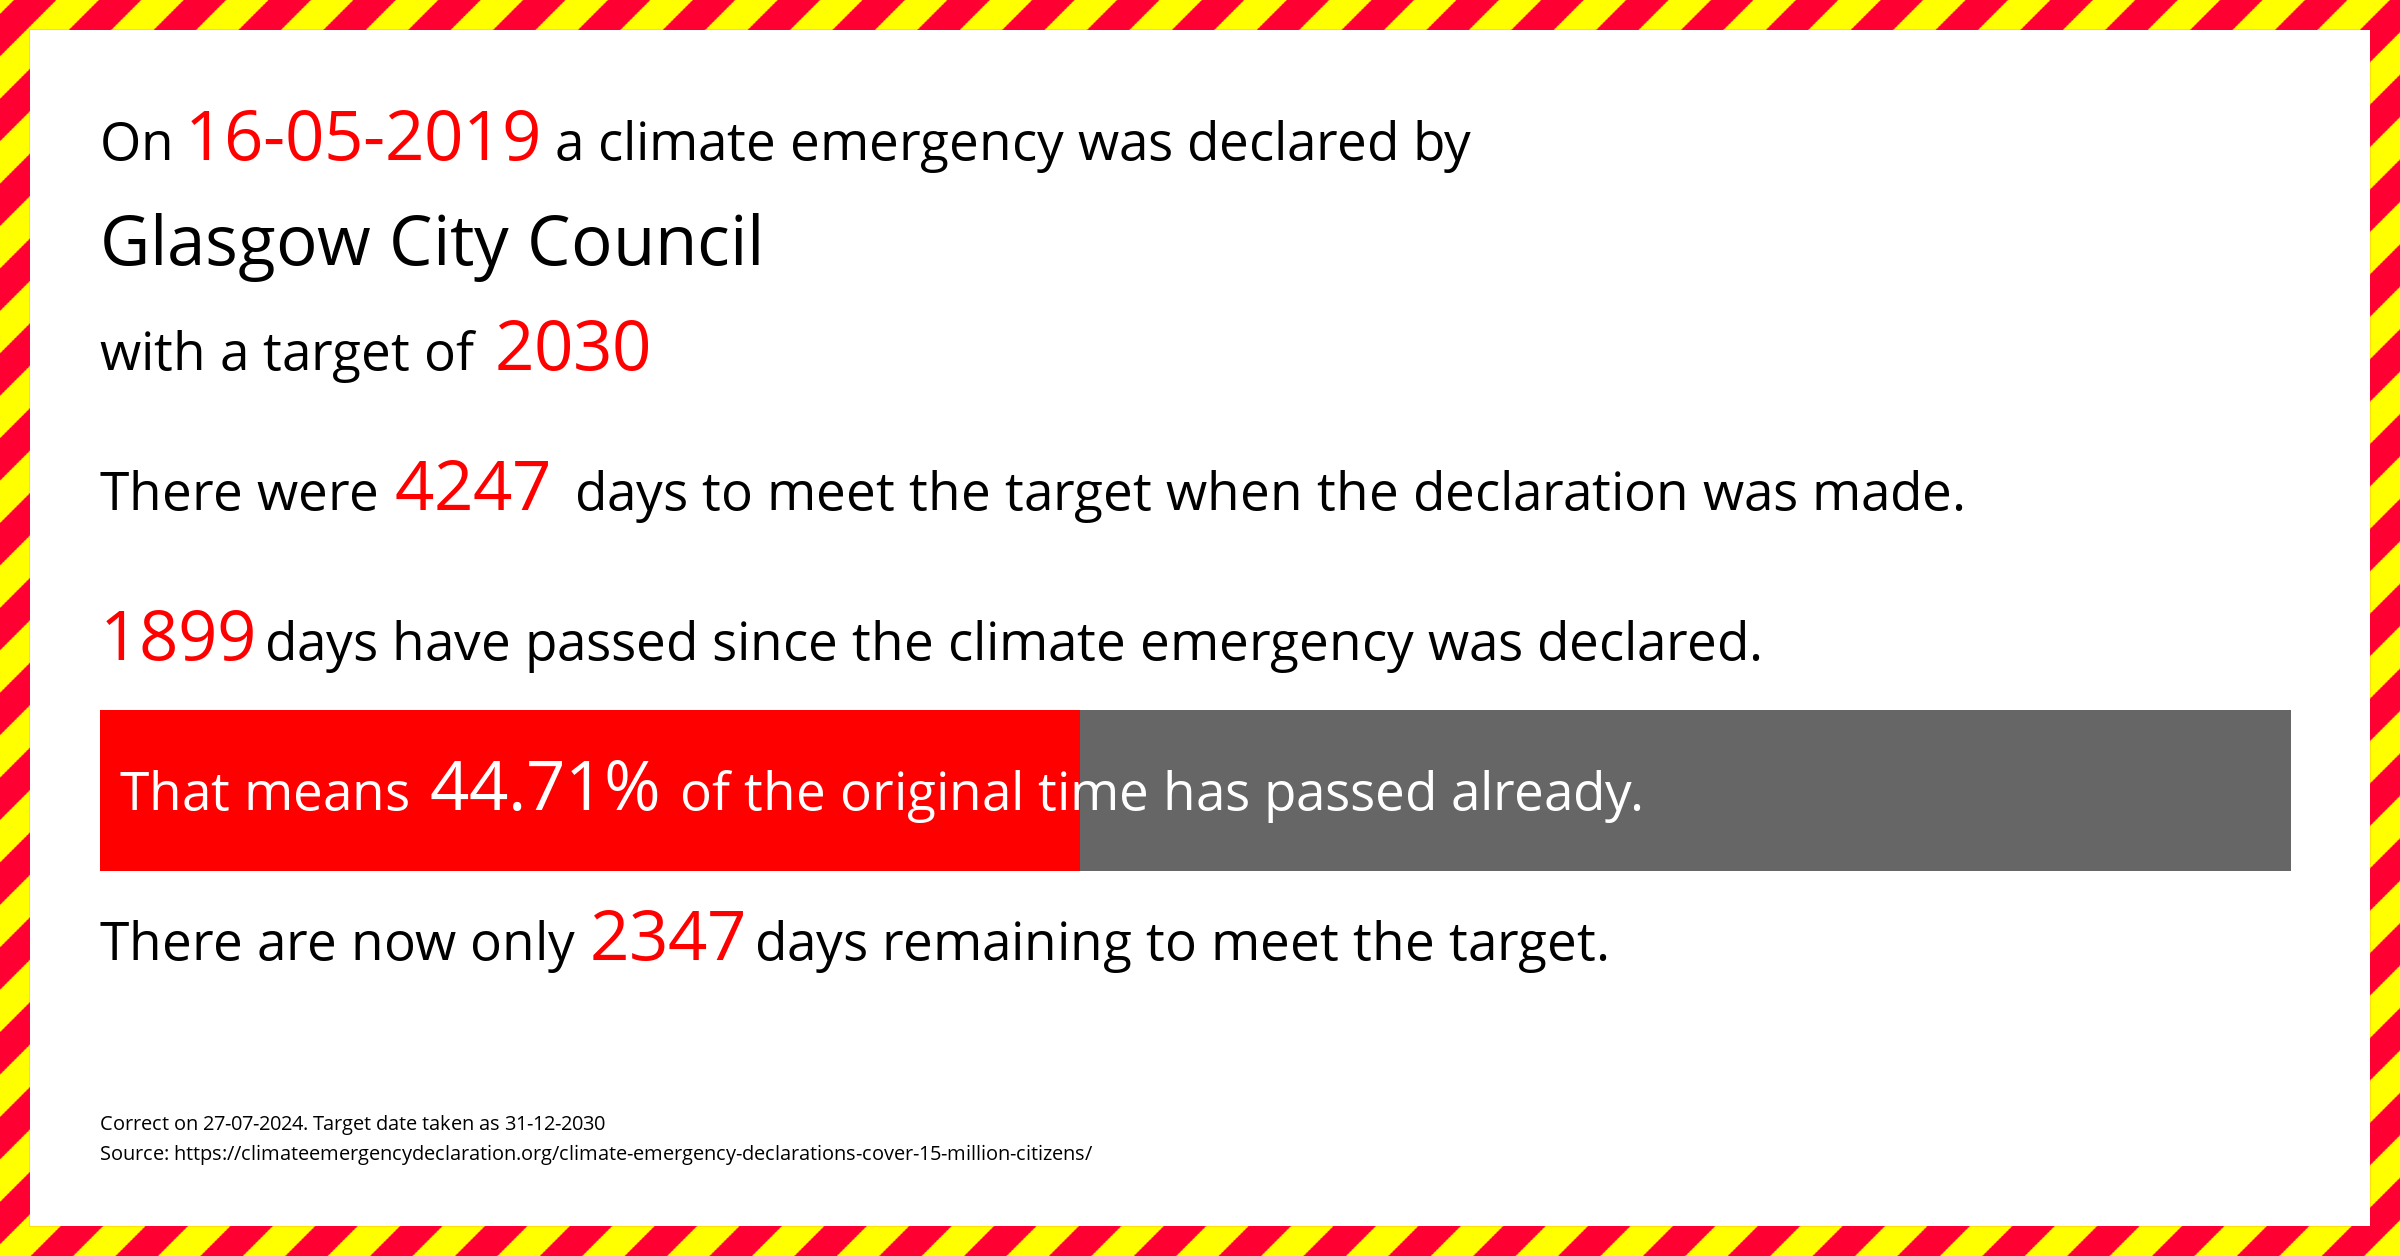 Glasgow City Council declared a Climate emergency on Thursday 16th May 2019, with a target of 2030.